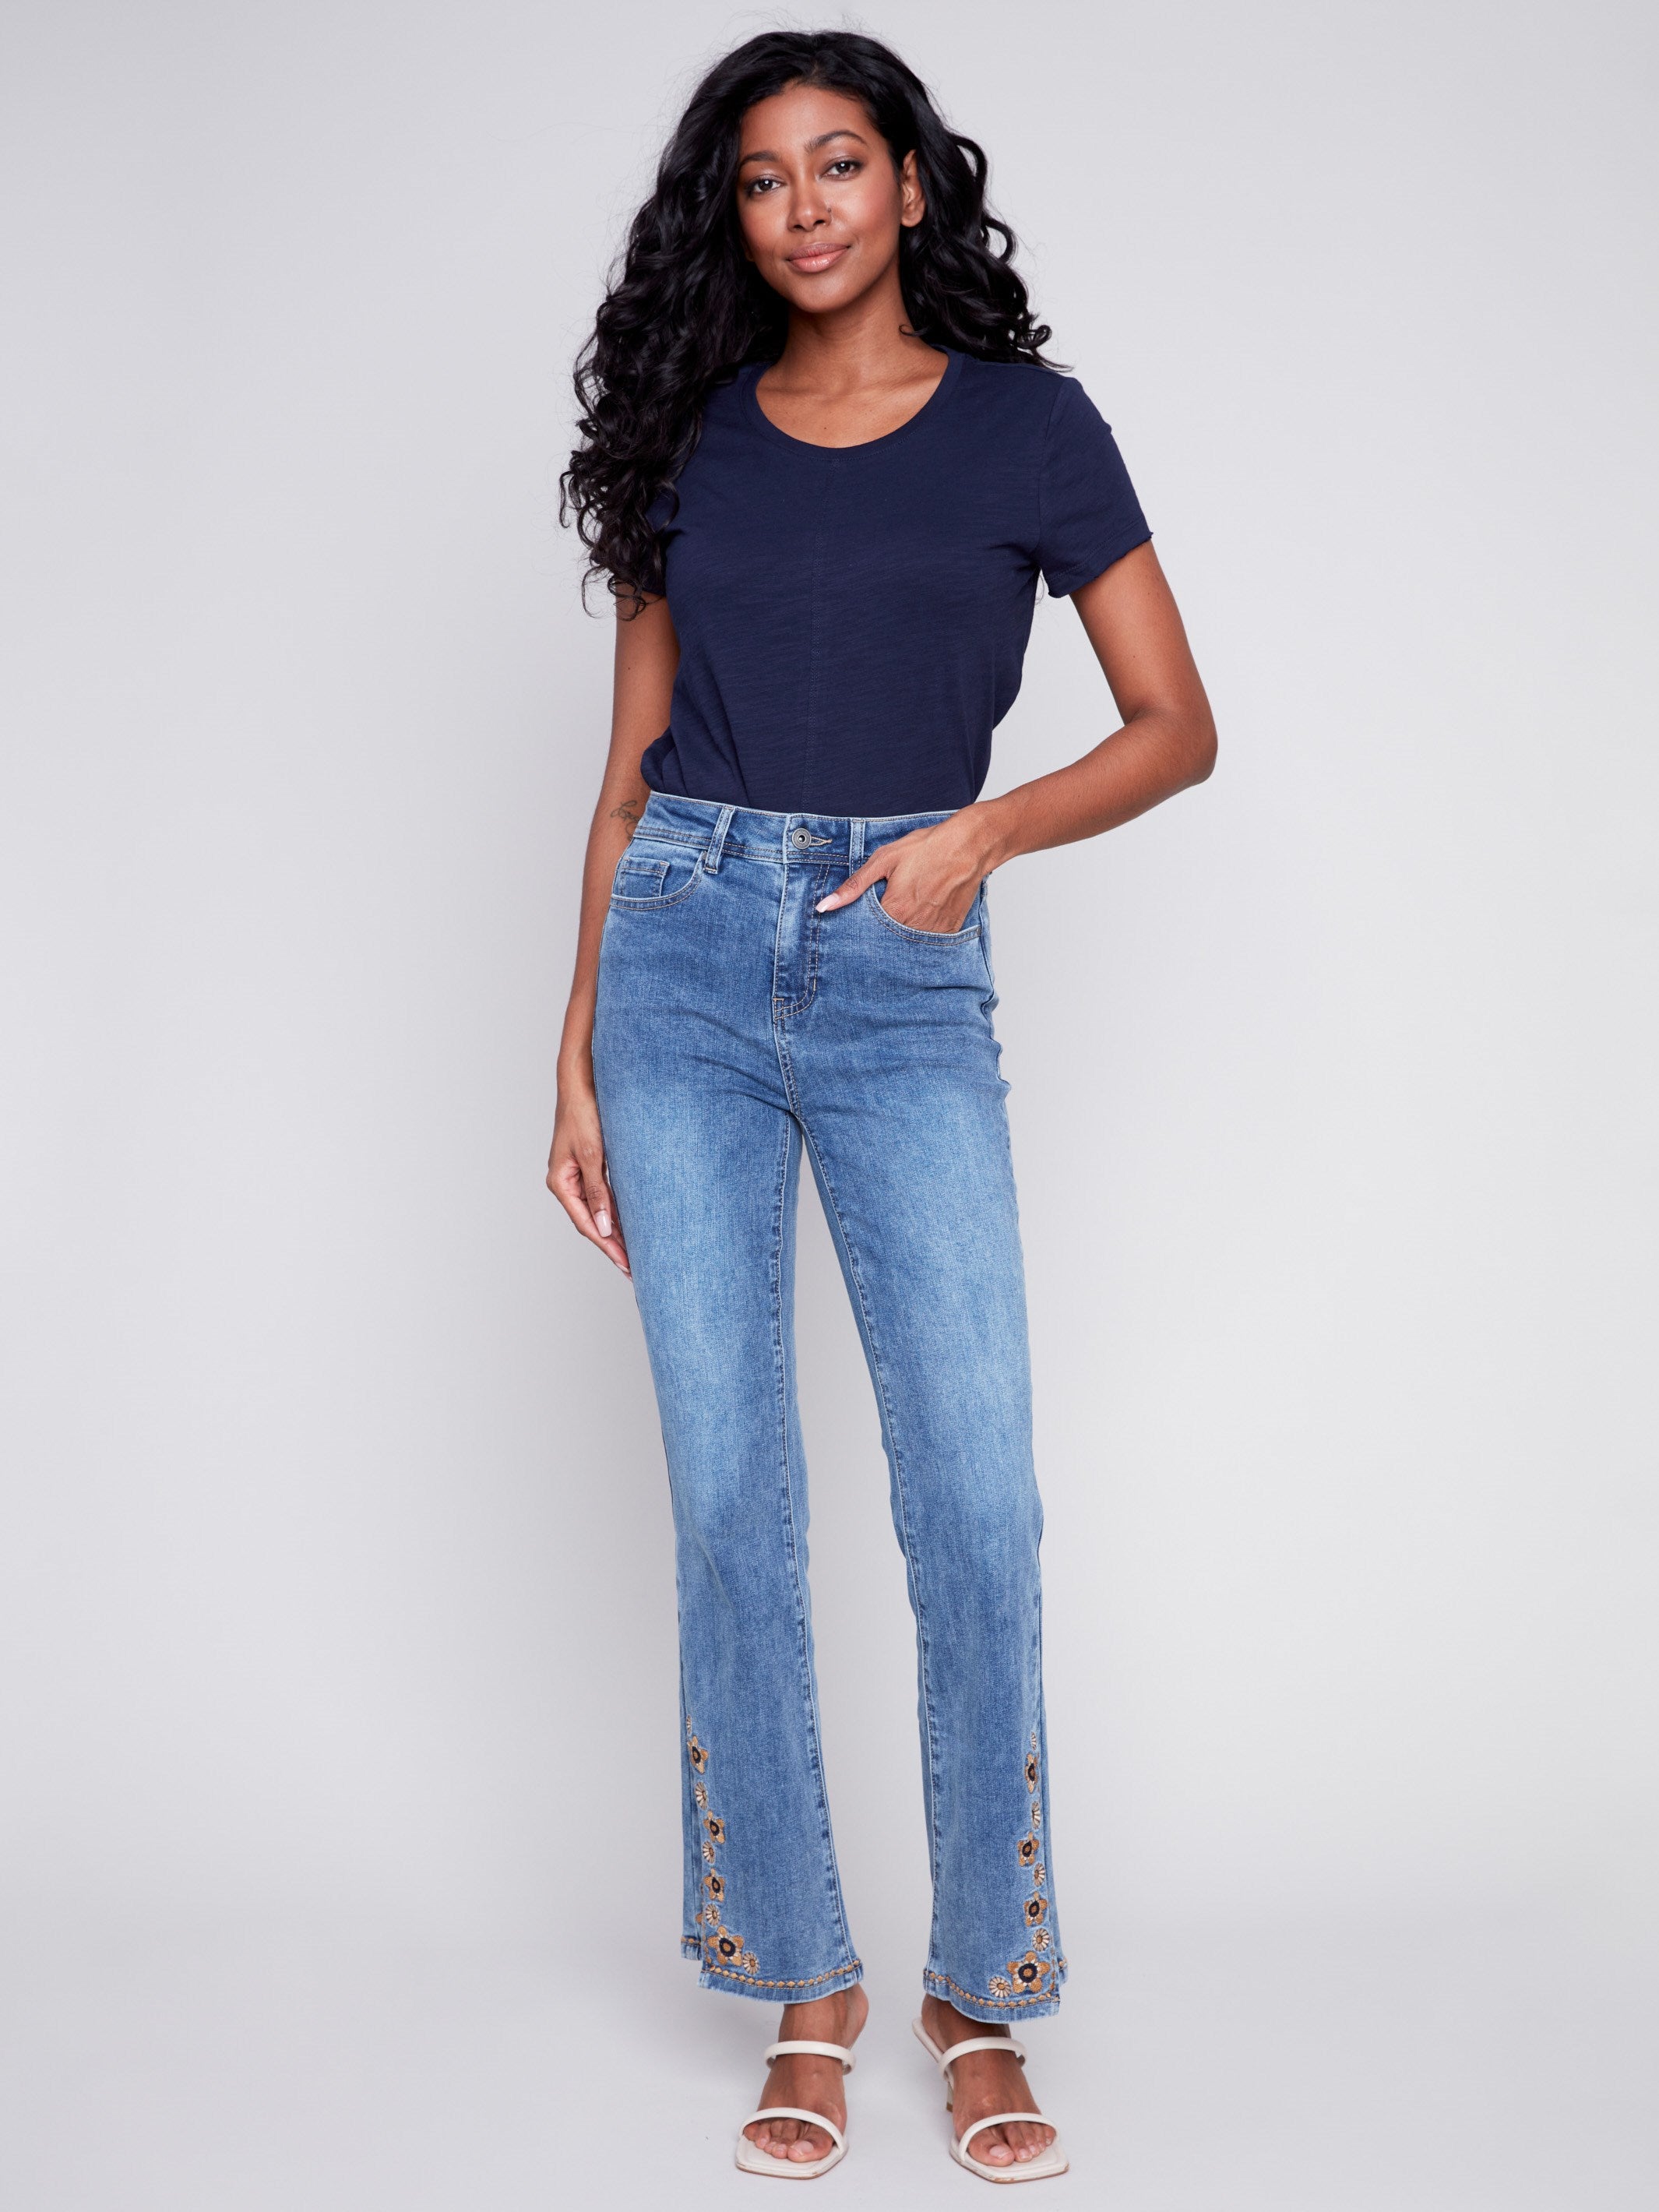 Embroidered Bootcut Jeans with Front Slits - Medium Blue - Charlie B Collection Canada - Image 1